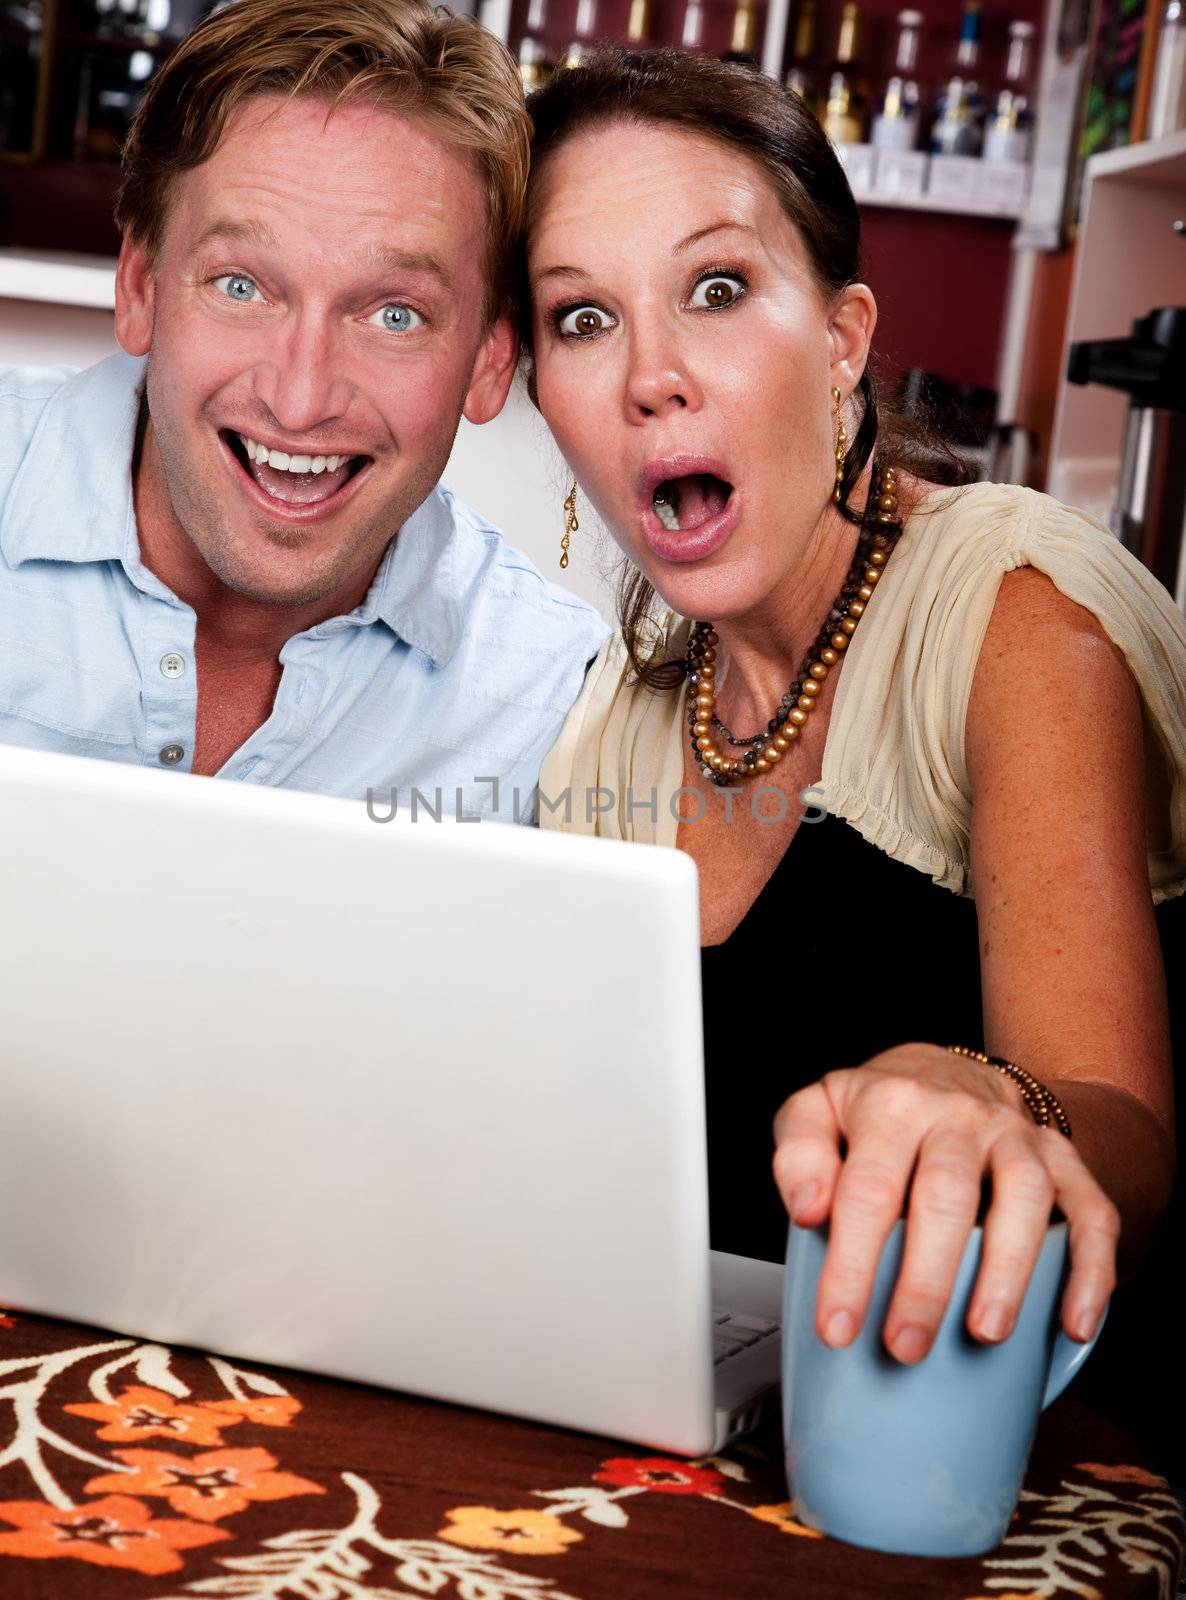 Couple in Coffee House with Laptop Computer by Creatista